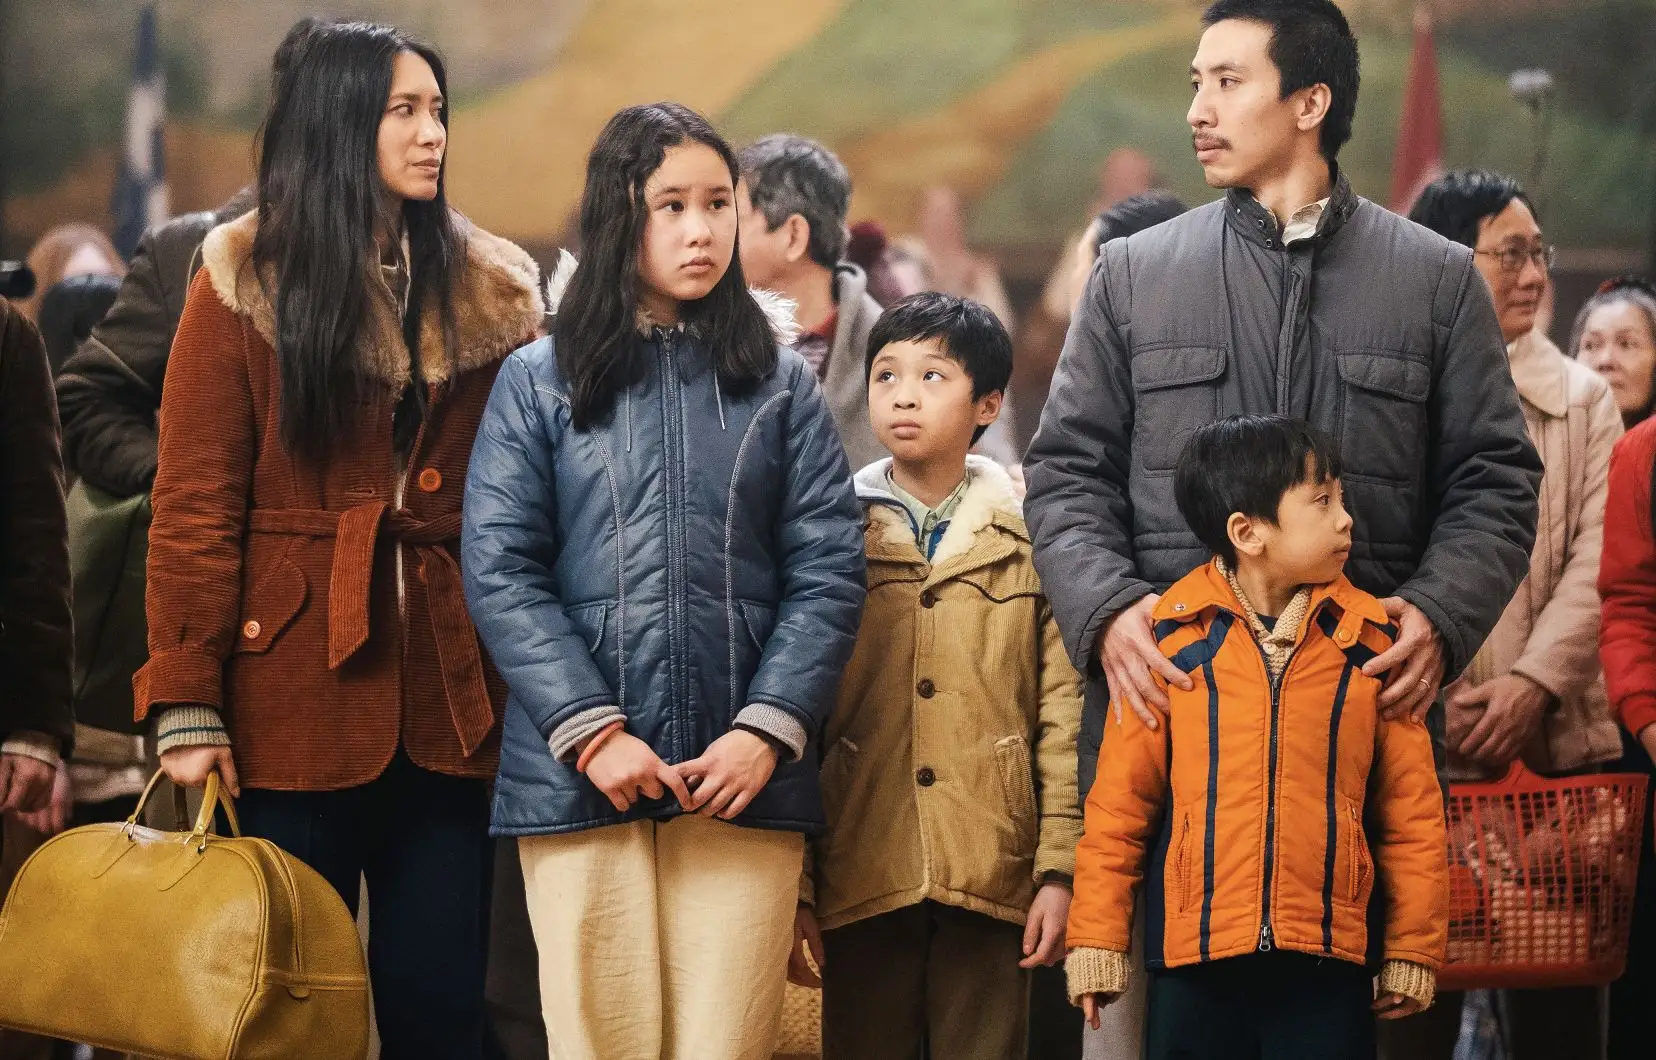 A family of children and adults stand together wearing winter jackets